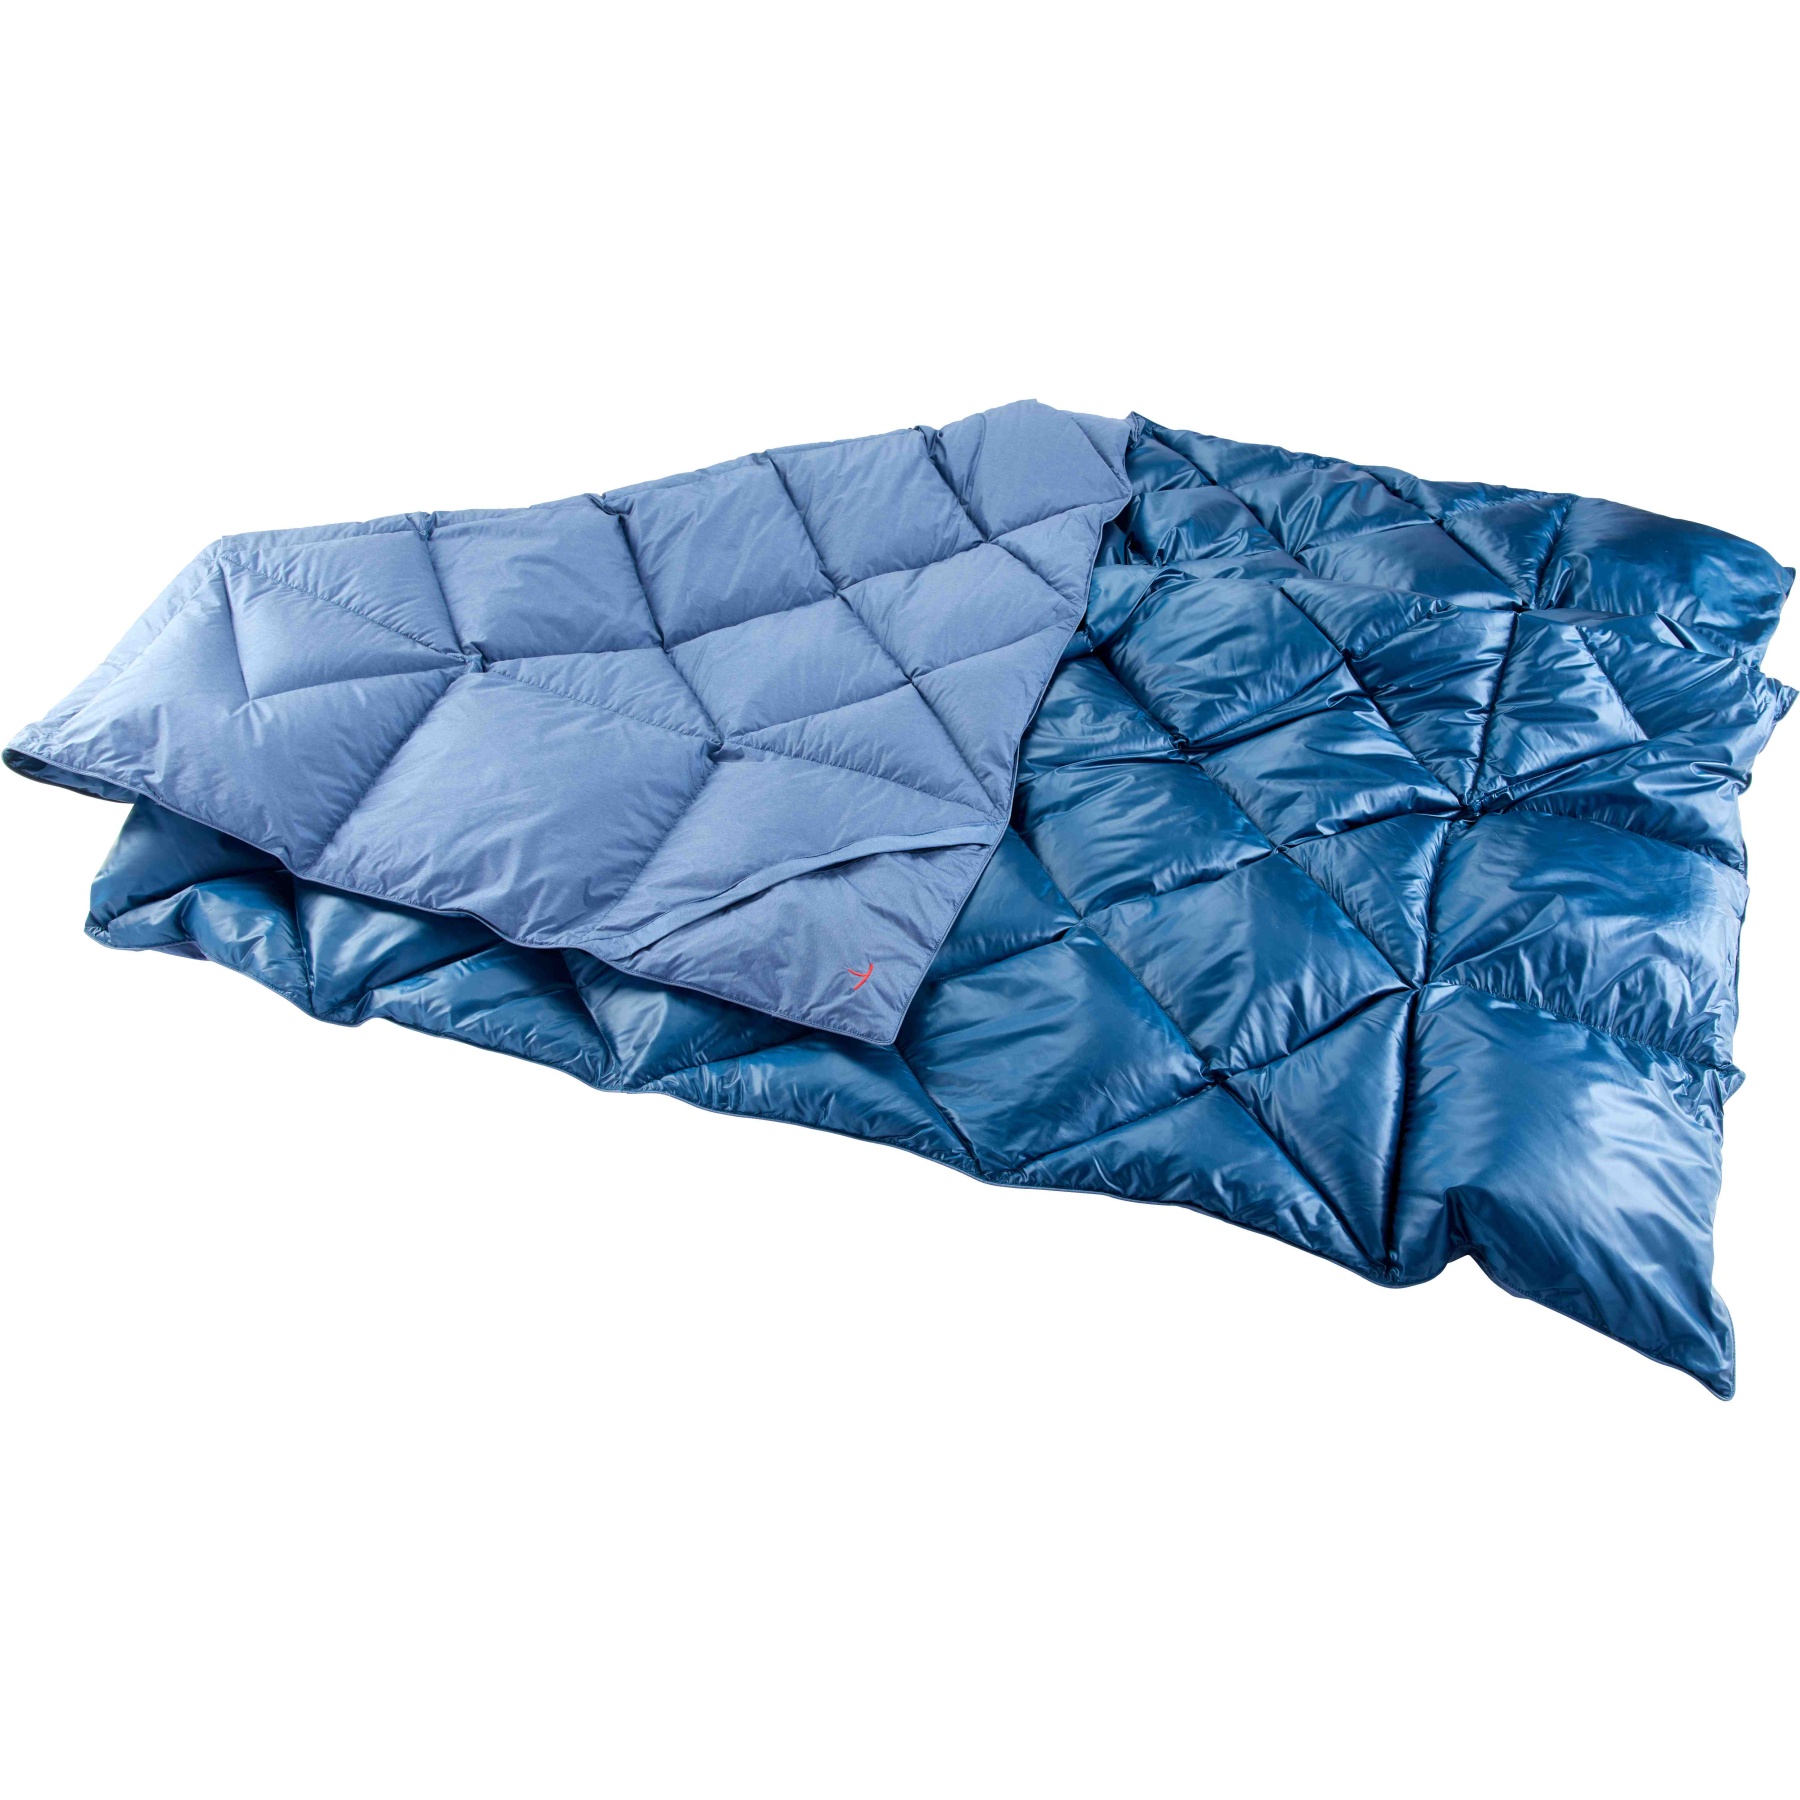 Picture of Y by Nordisk Kiby Packable Down Travel Blanket - arctic night